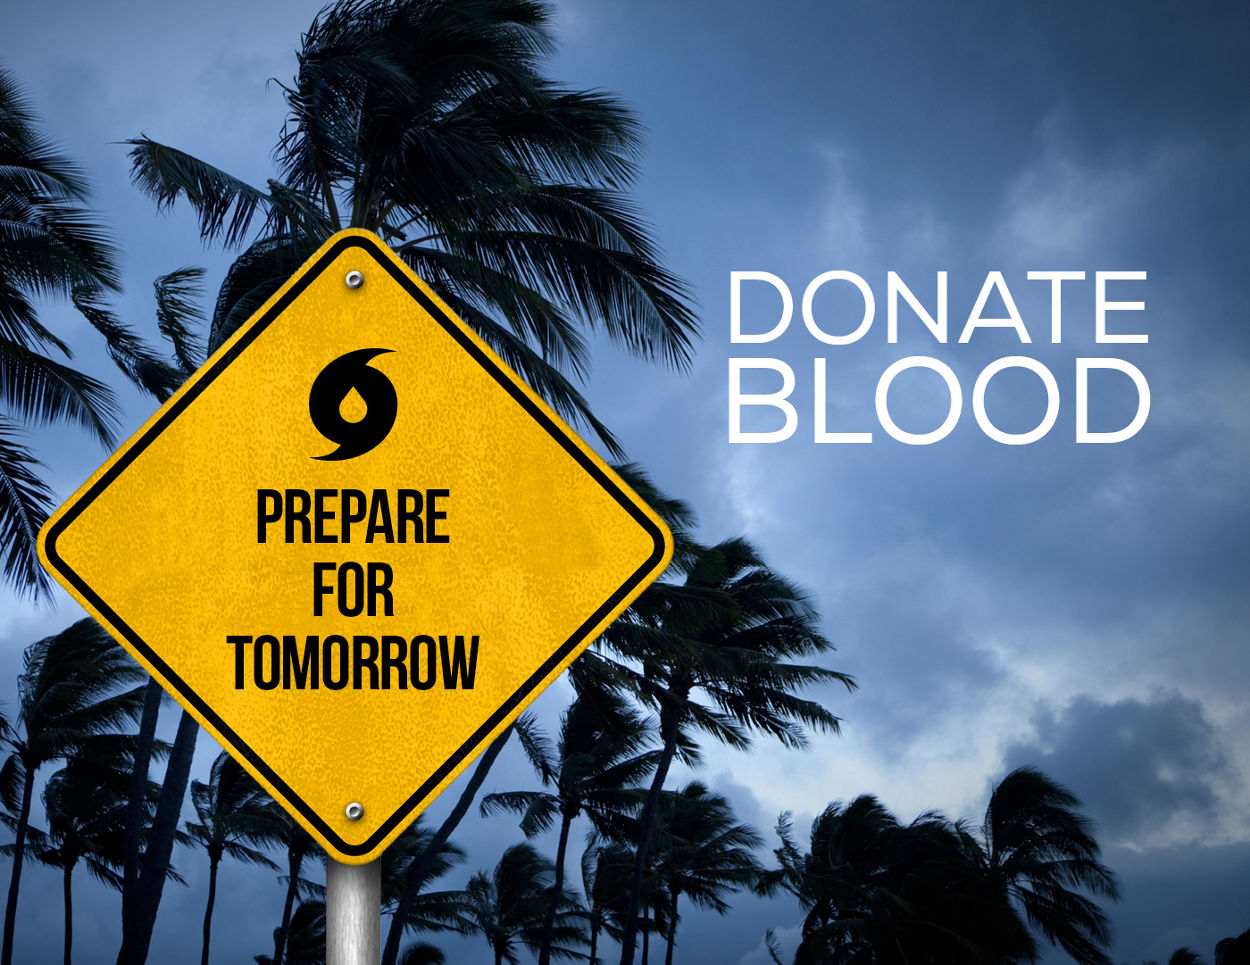 donate blood, prepare for tomorrow street sign with hurricane symbol